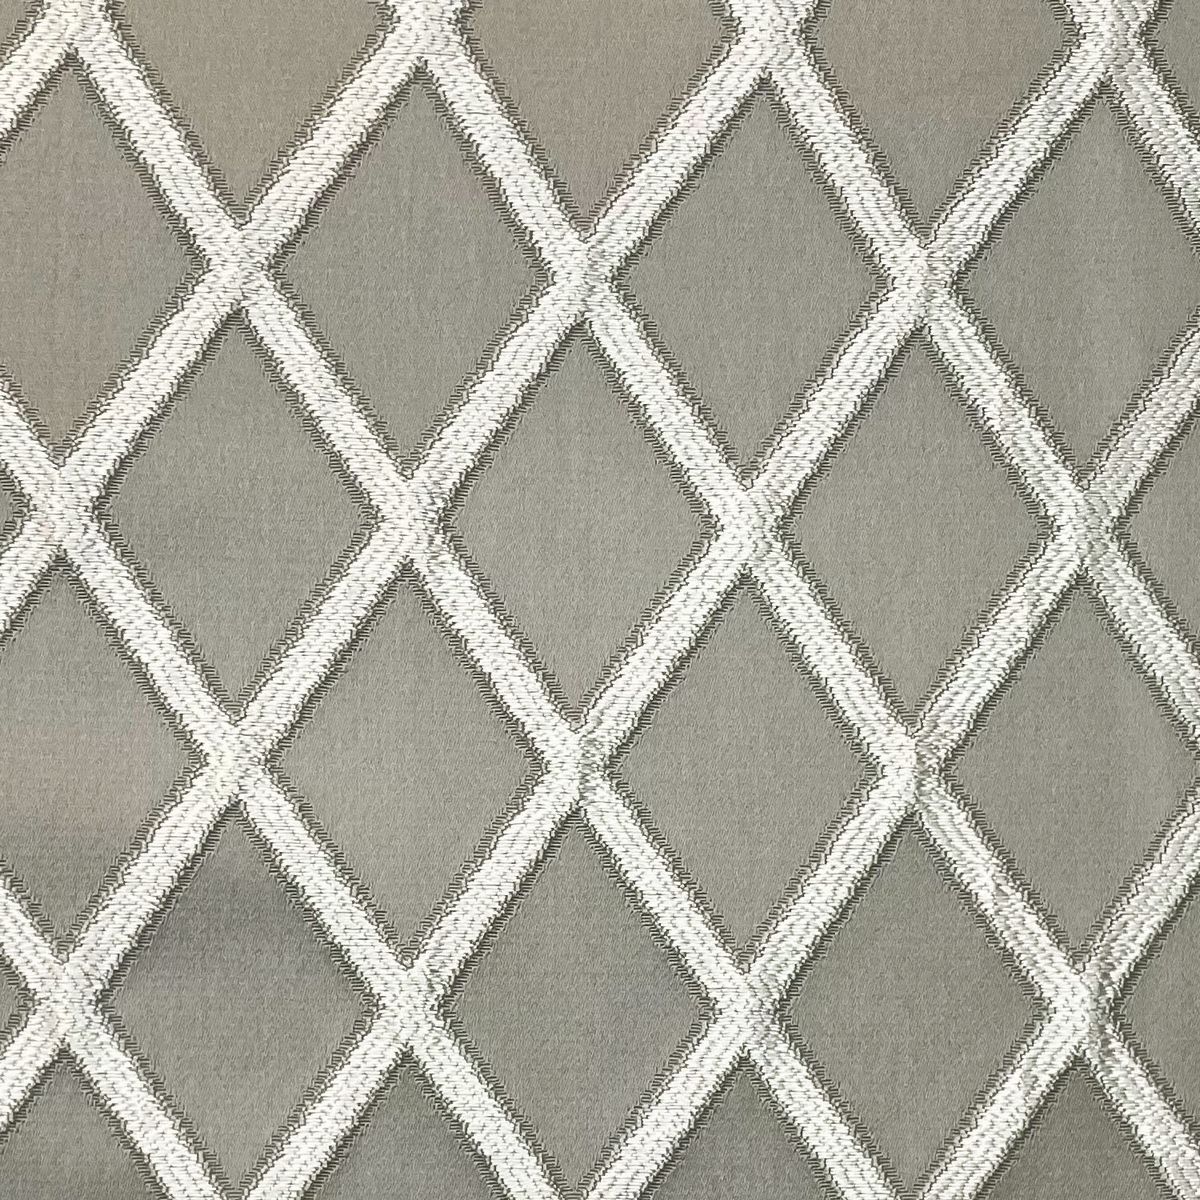 Monza Dove Fabric by Chatham Glyn